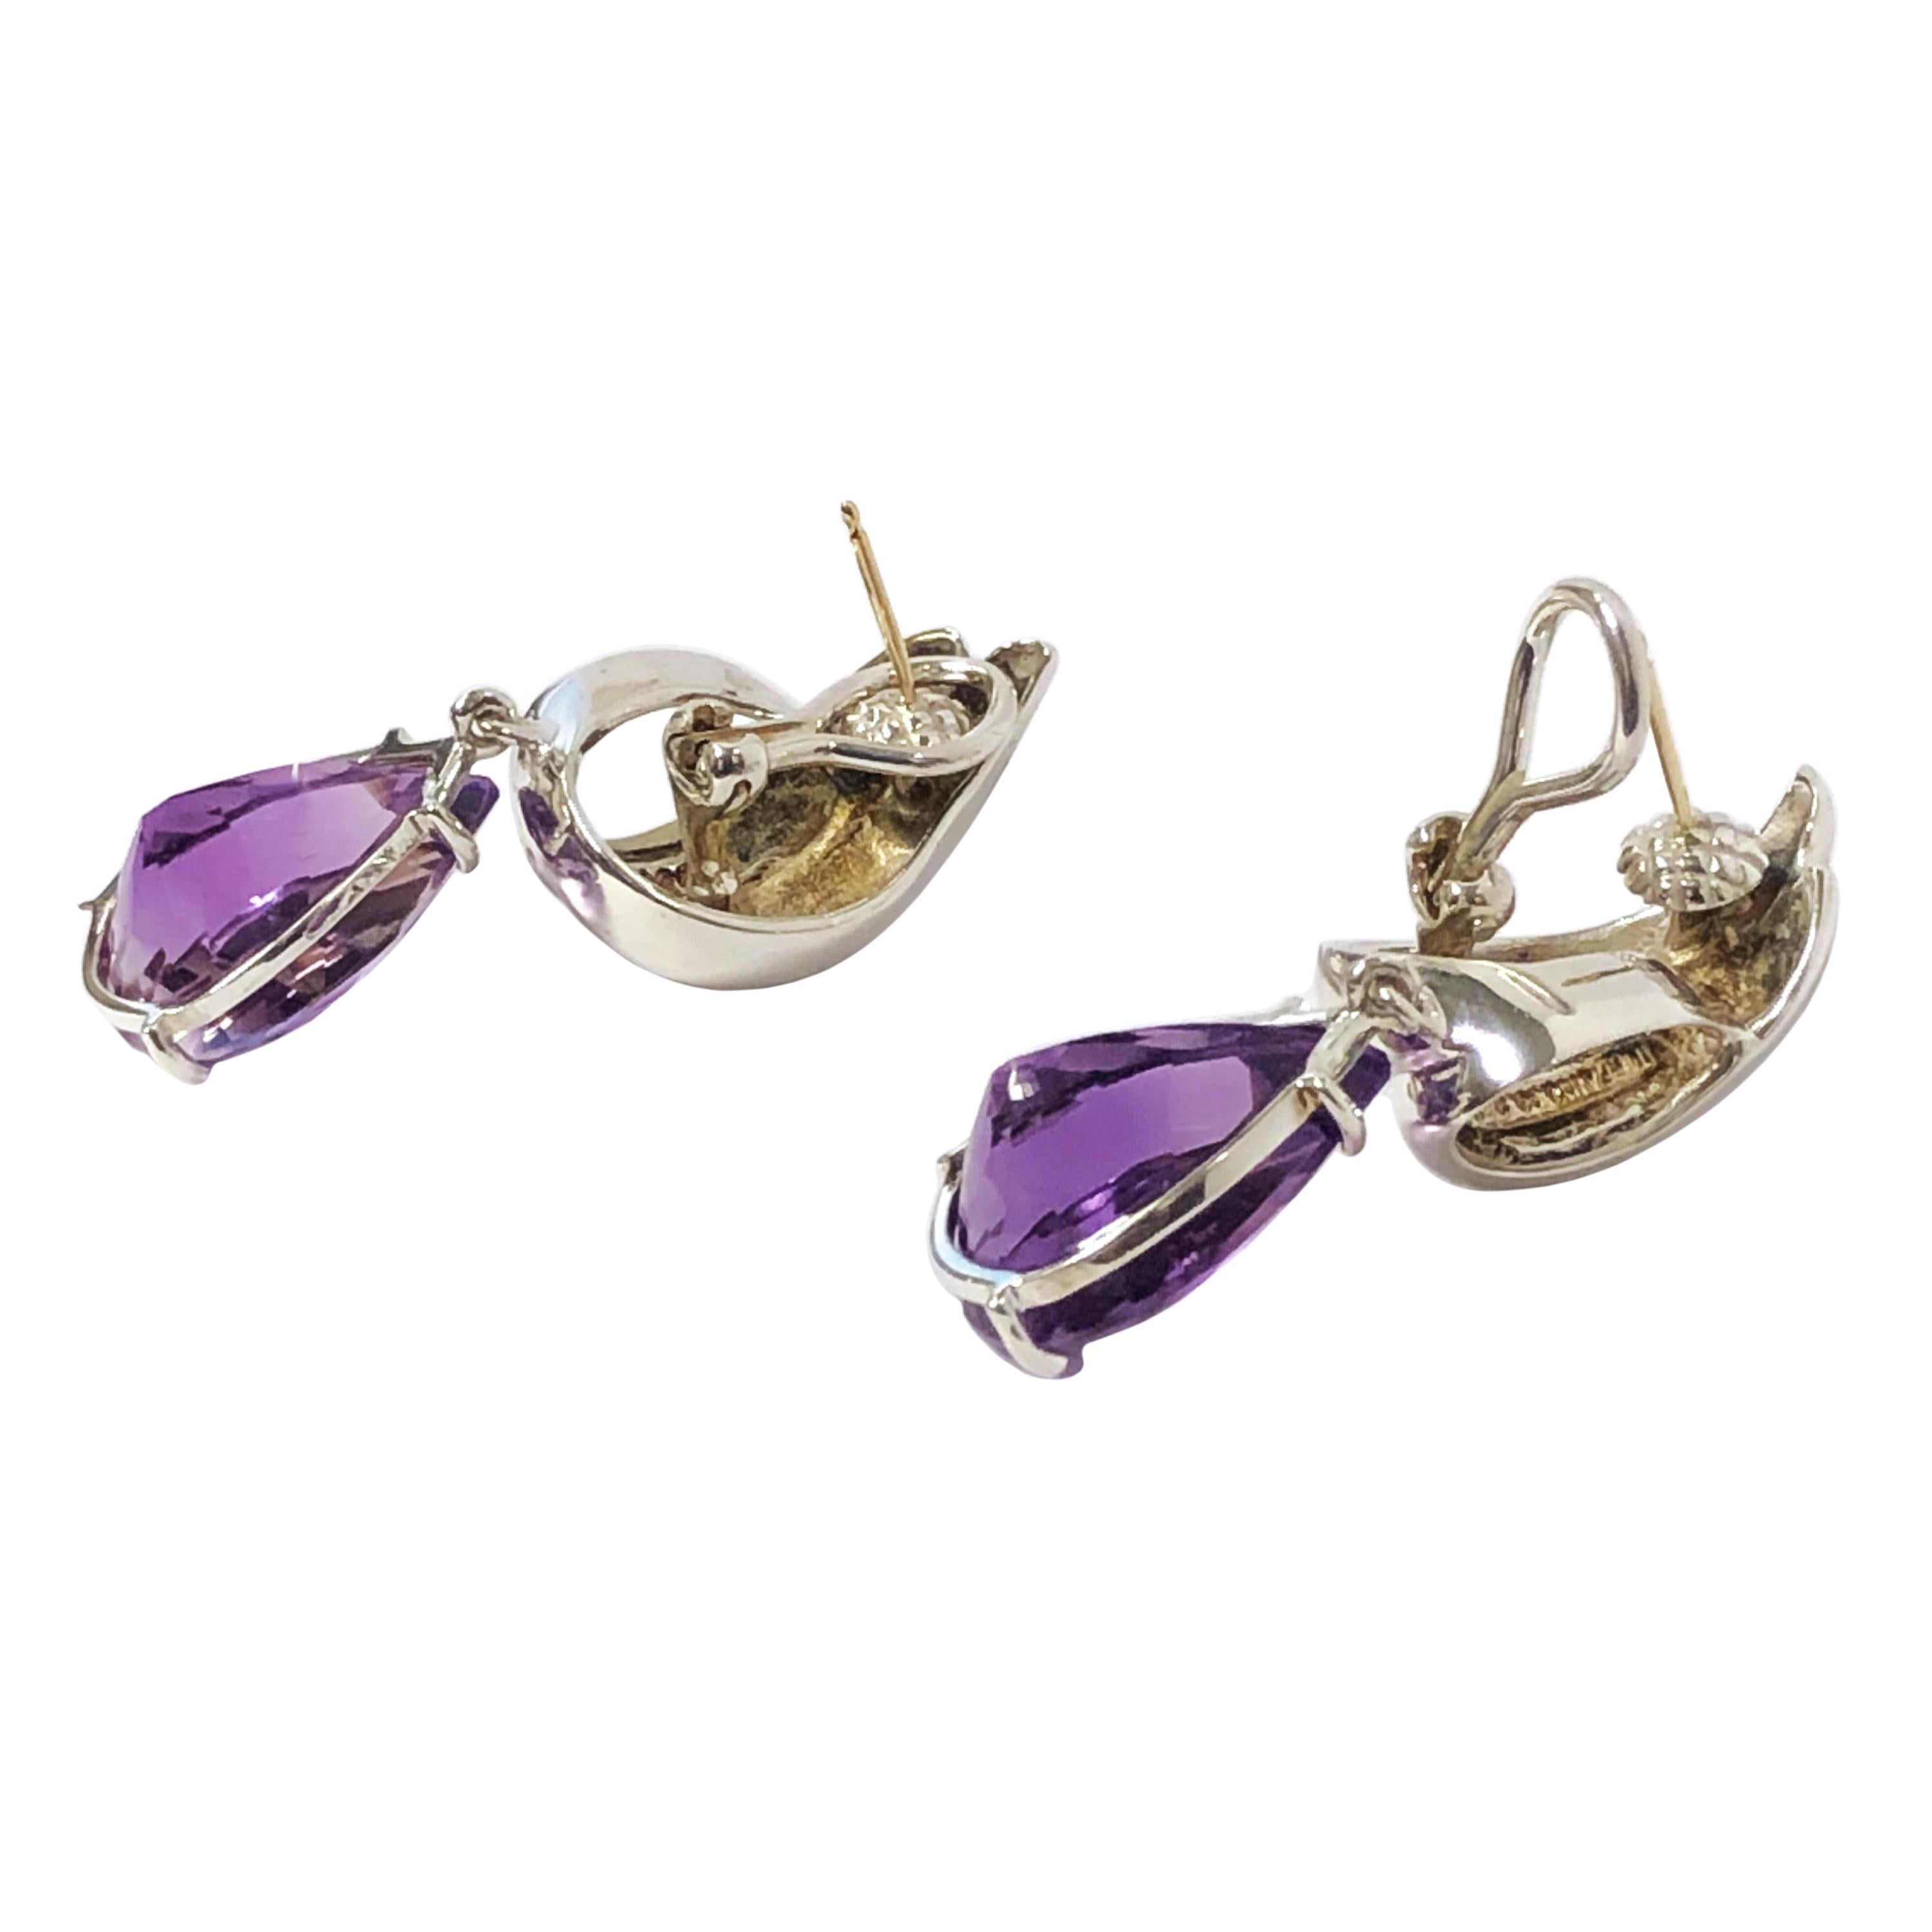 Circa 1980s Tiffany & Company Sterling Silver earrings, measuring 1 3/4 inches in length, the Pear shape Amethysts measure 19 X 13 X 10 approximately 5 carats each. Omega Backs with a Post. Come in a Tiffany suede Travel Pouch.